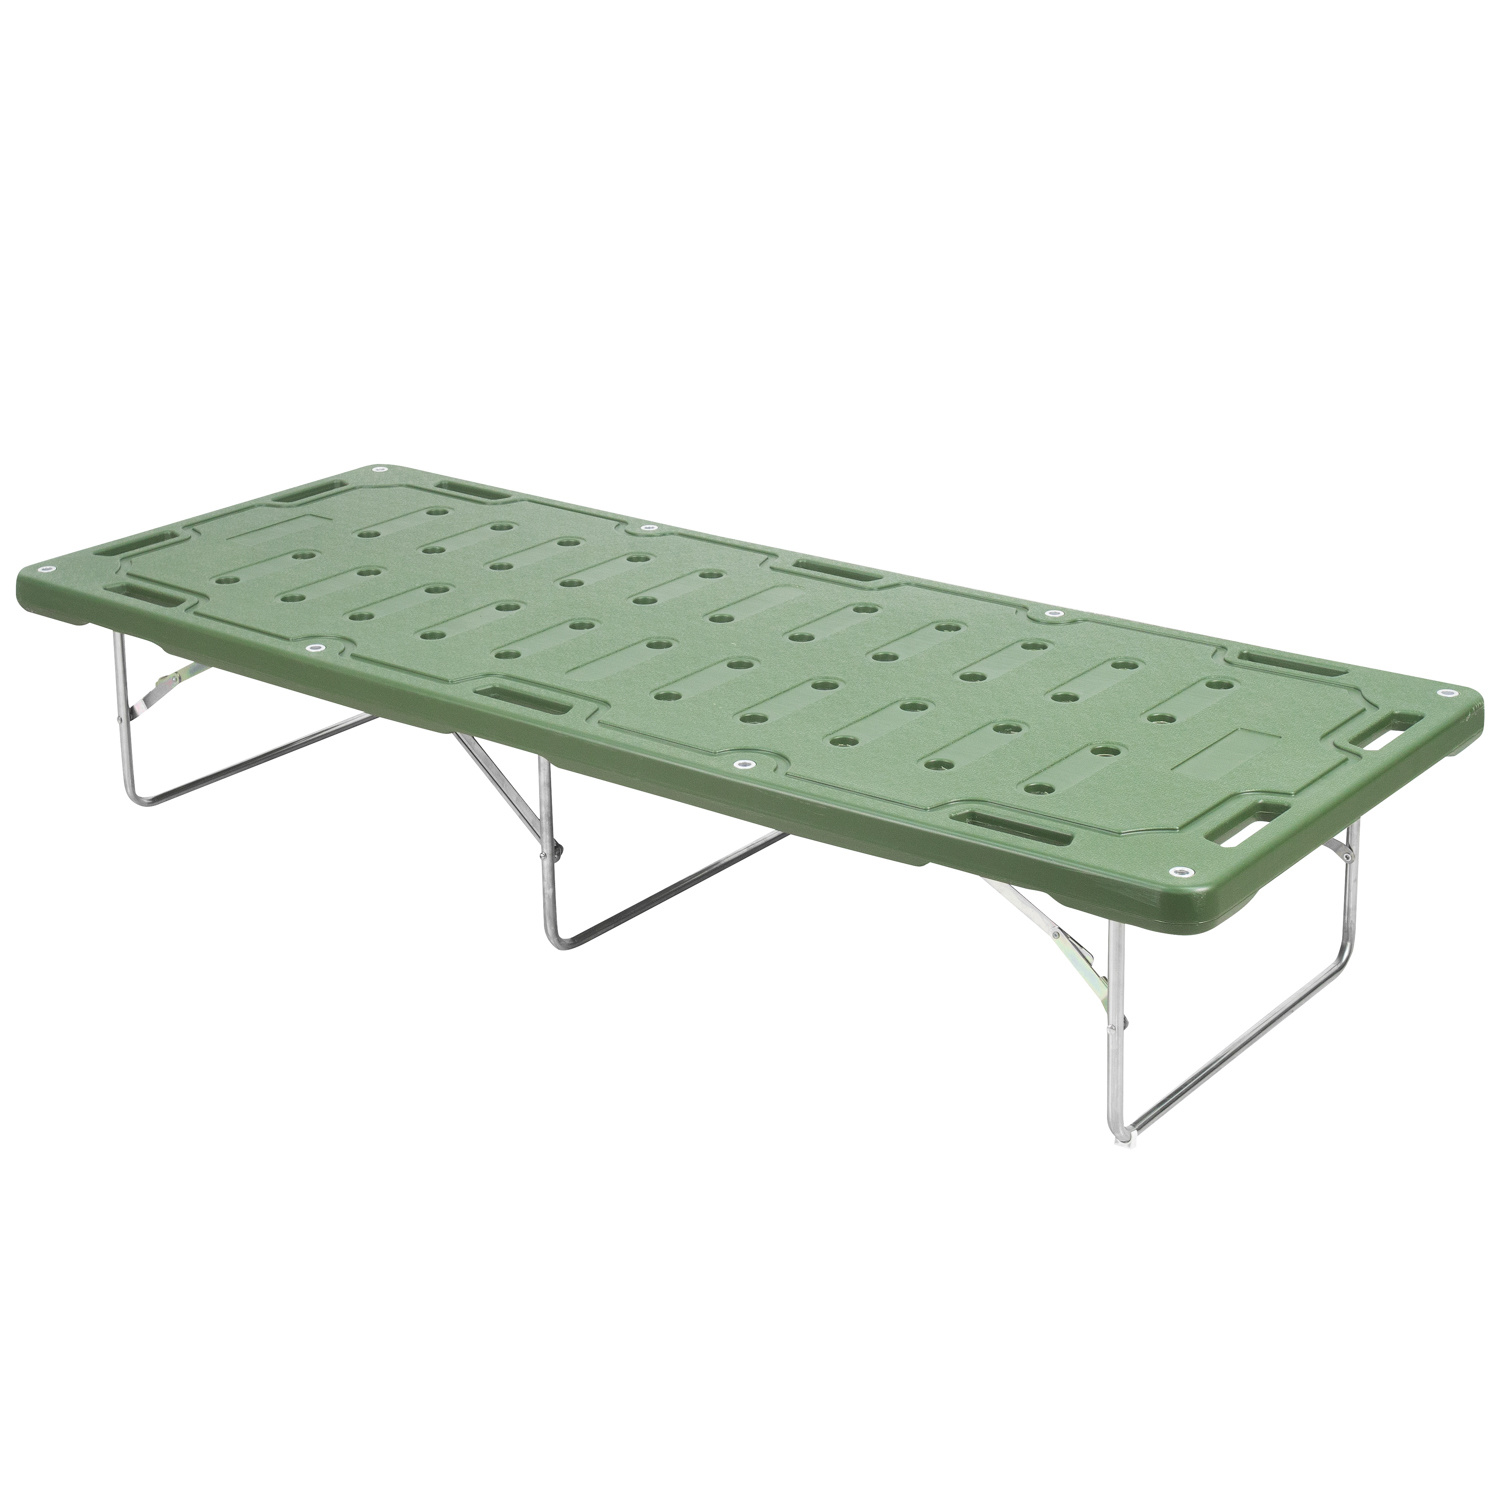 PX2021-P800 Field bed and Simple Stretcher